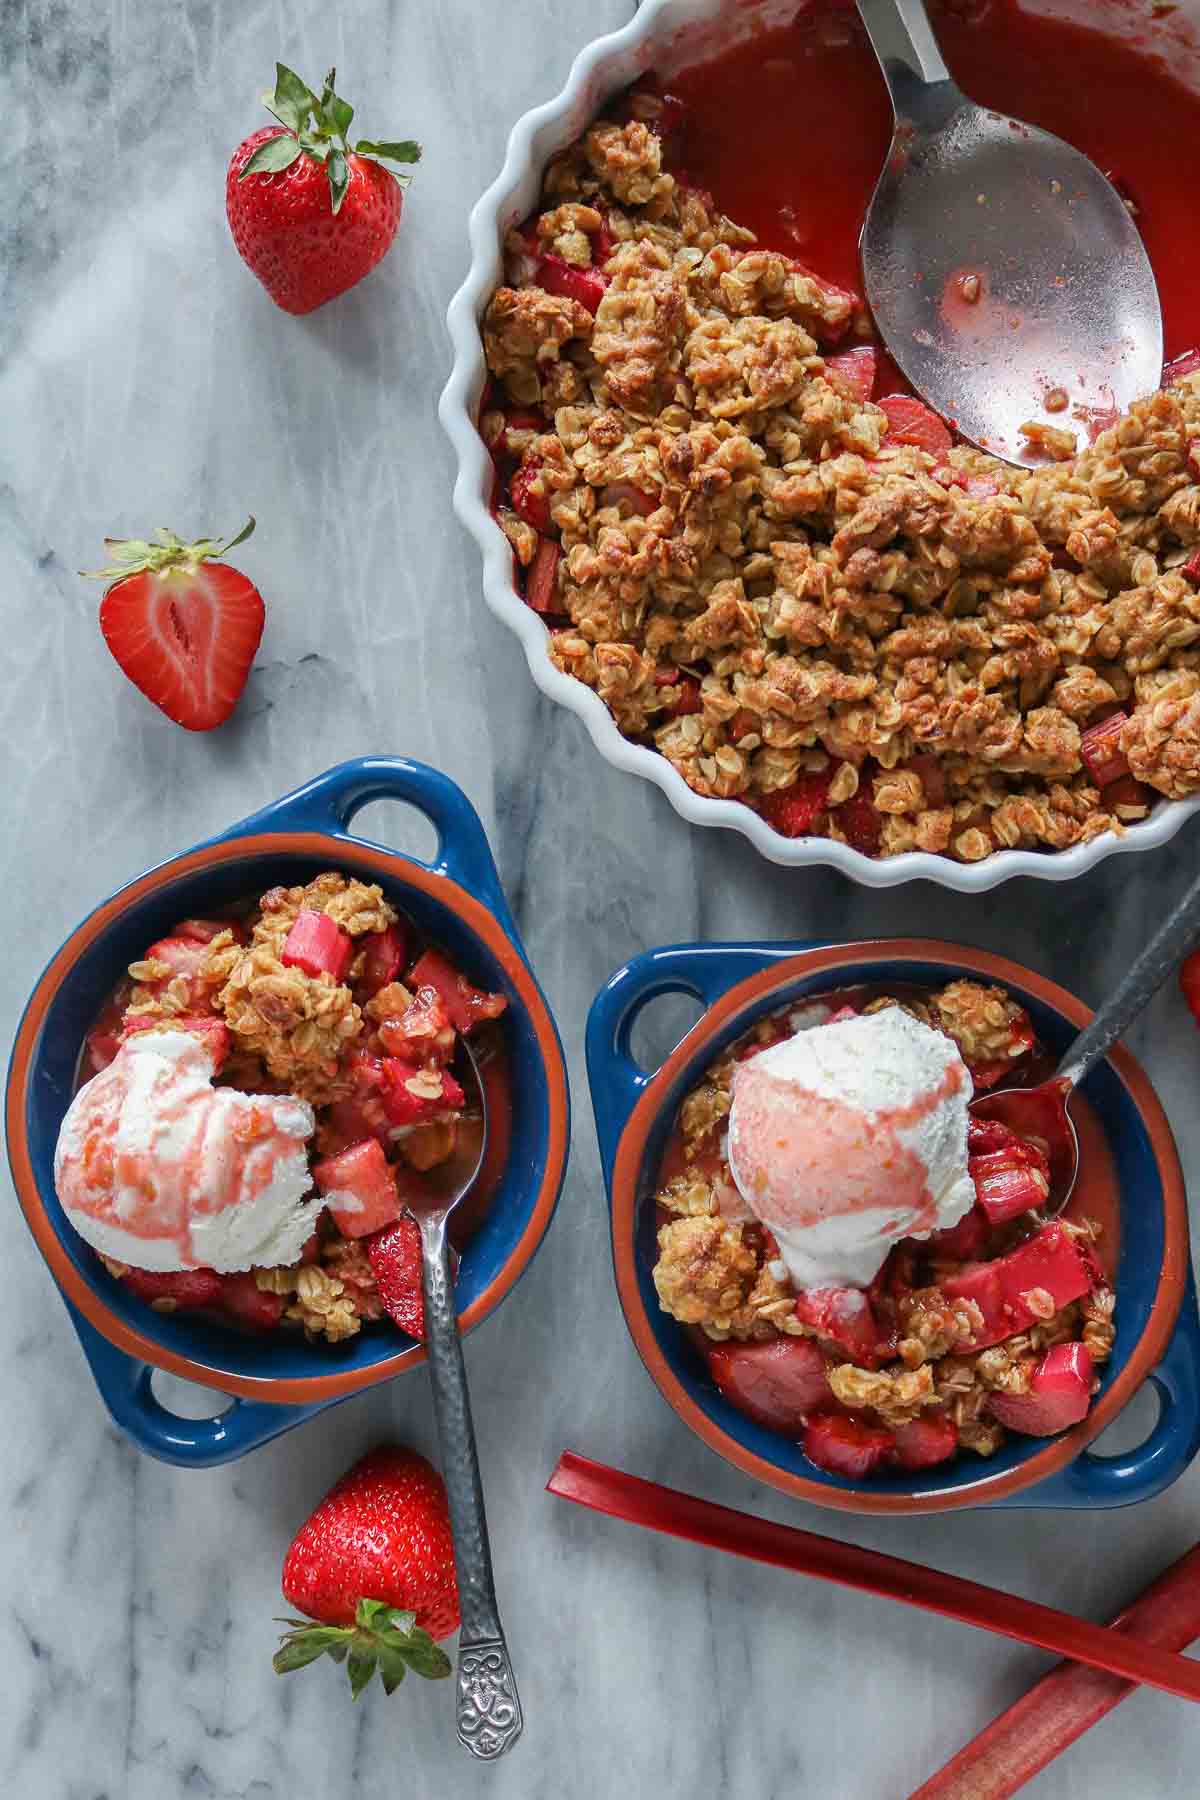 Two portions of fruit crisp with ice cream alongside a serving dish of the fruit crisp.